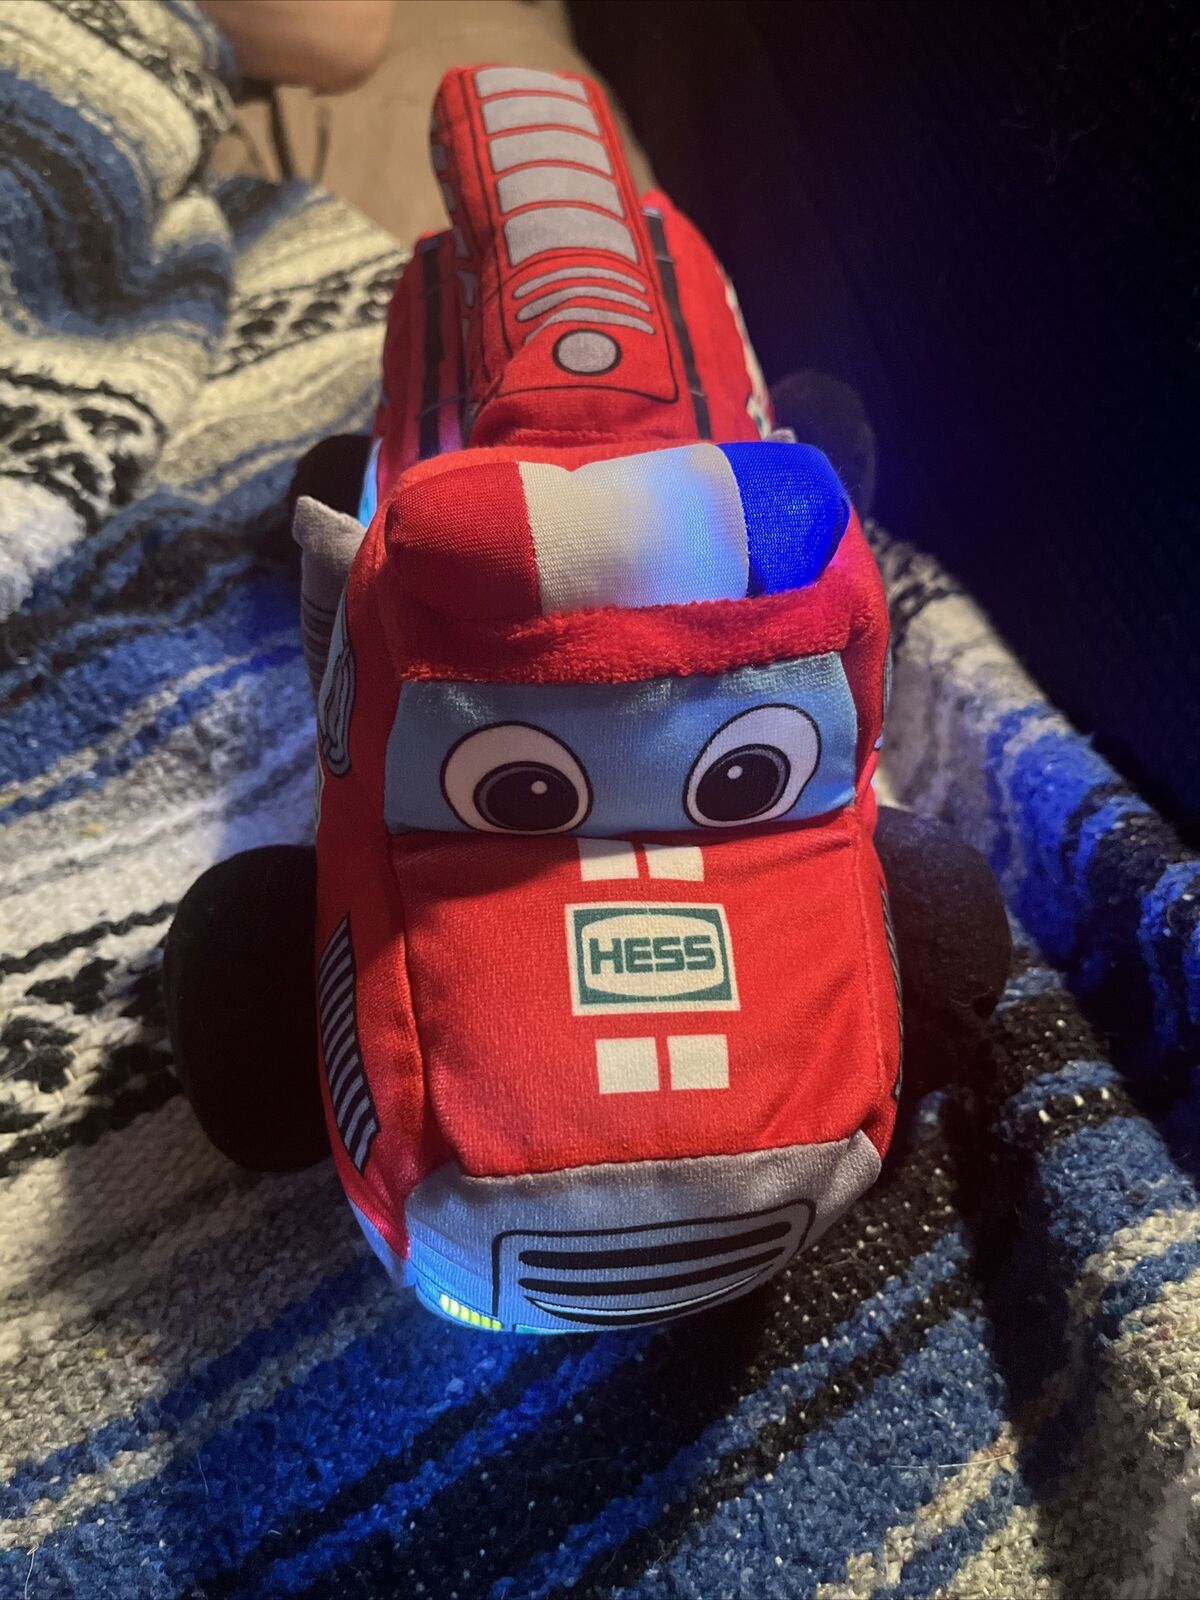 Hess 2020 Soft Fire Truck Plush My First Hess Truck Lights Up Sings Tested Works